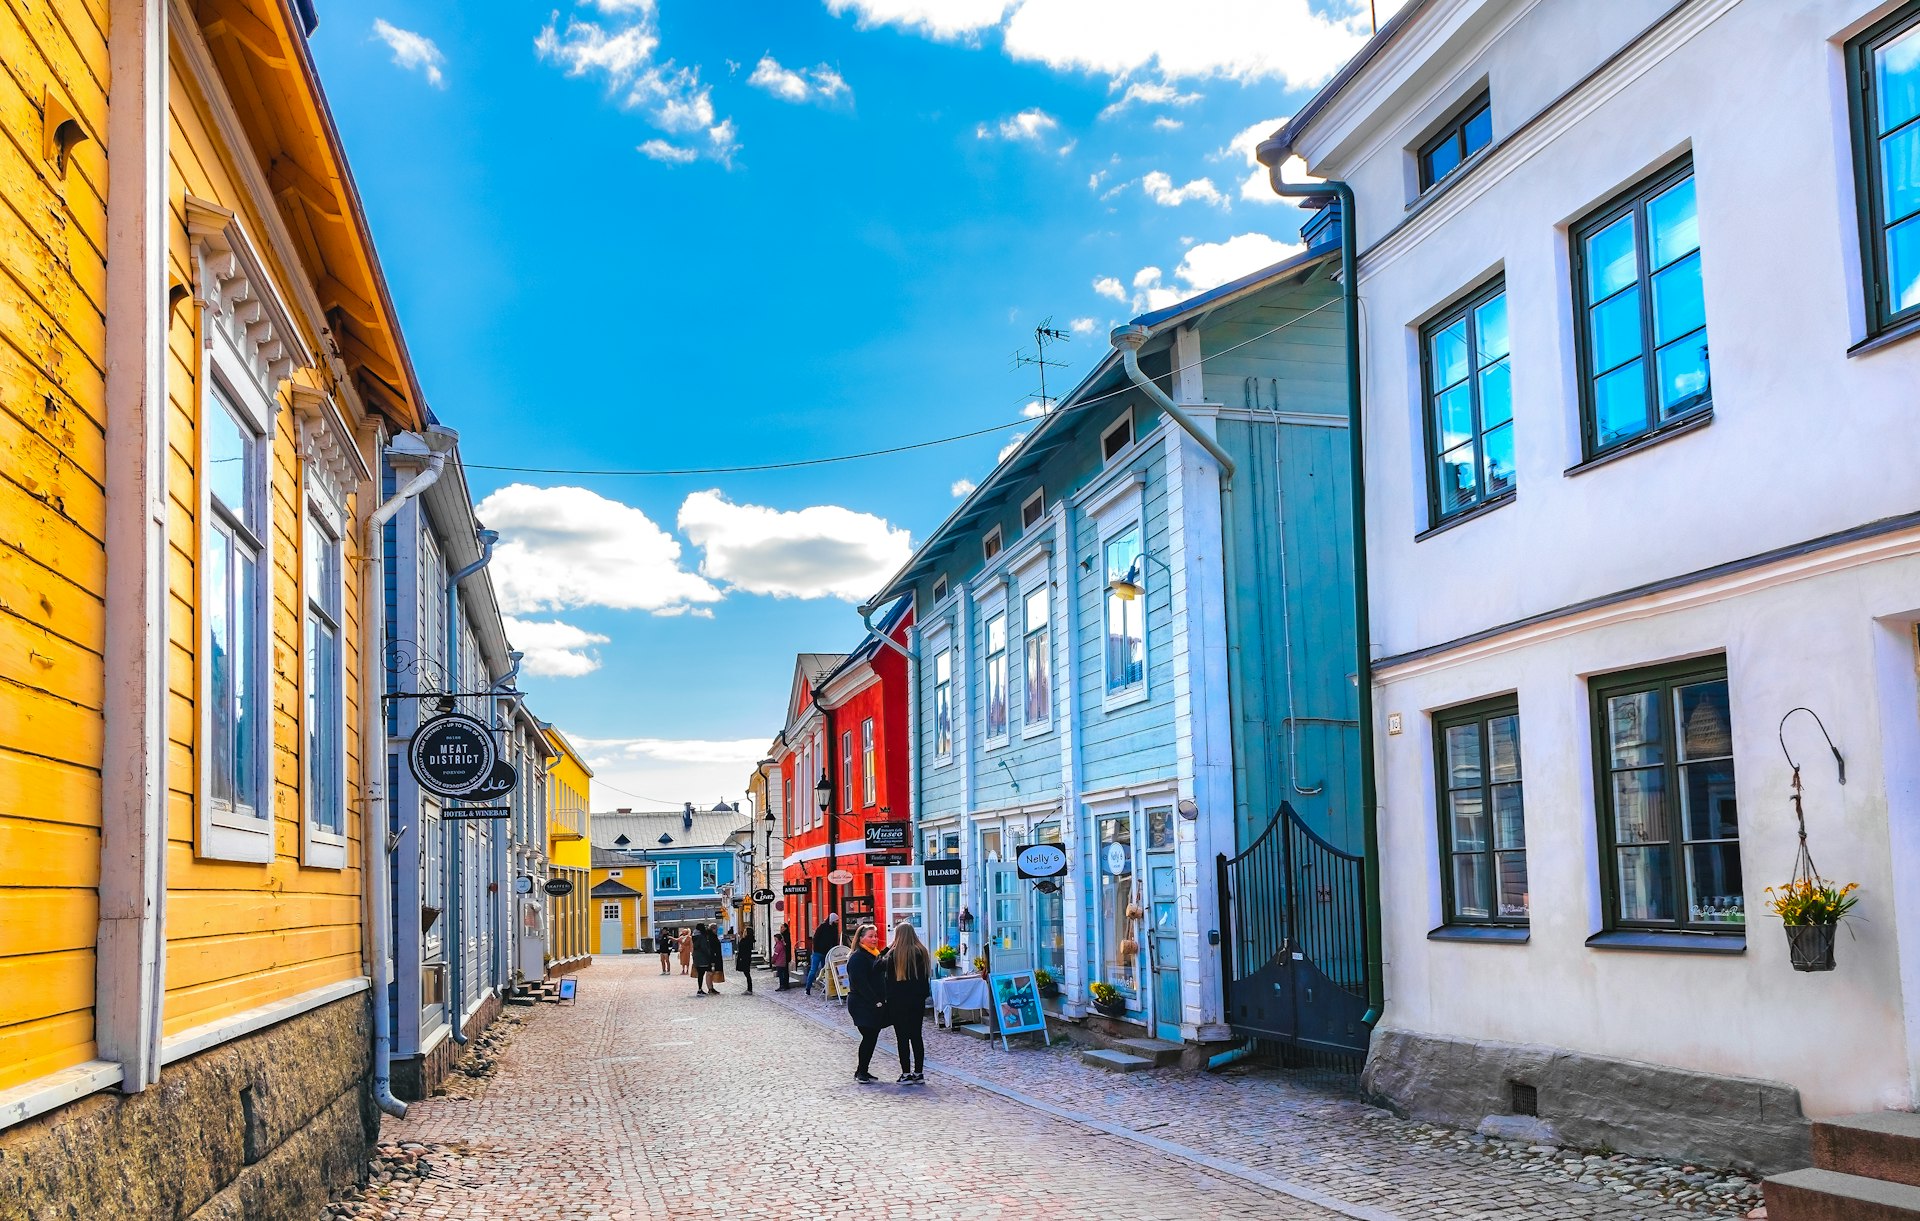 A street perspective with people walking by colorful wooden houses under a bright blue sky in Porvoo, Finland, Europe